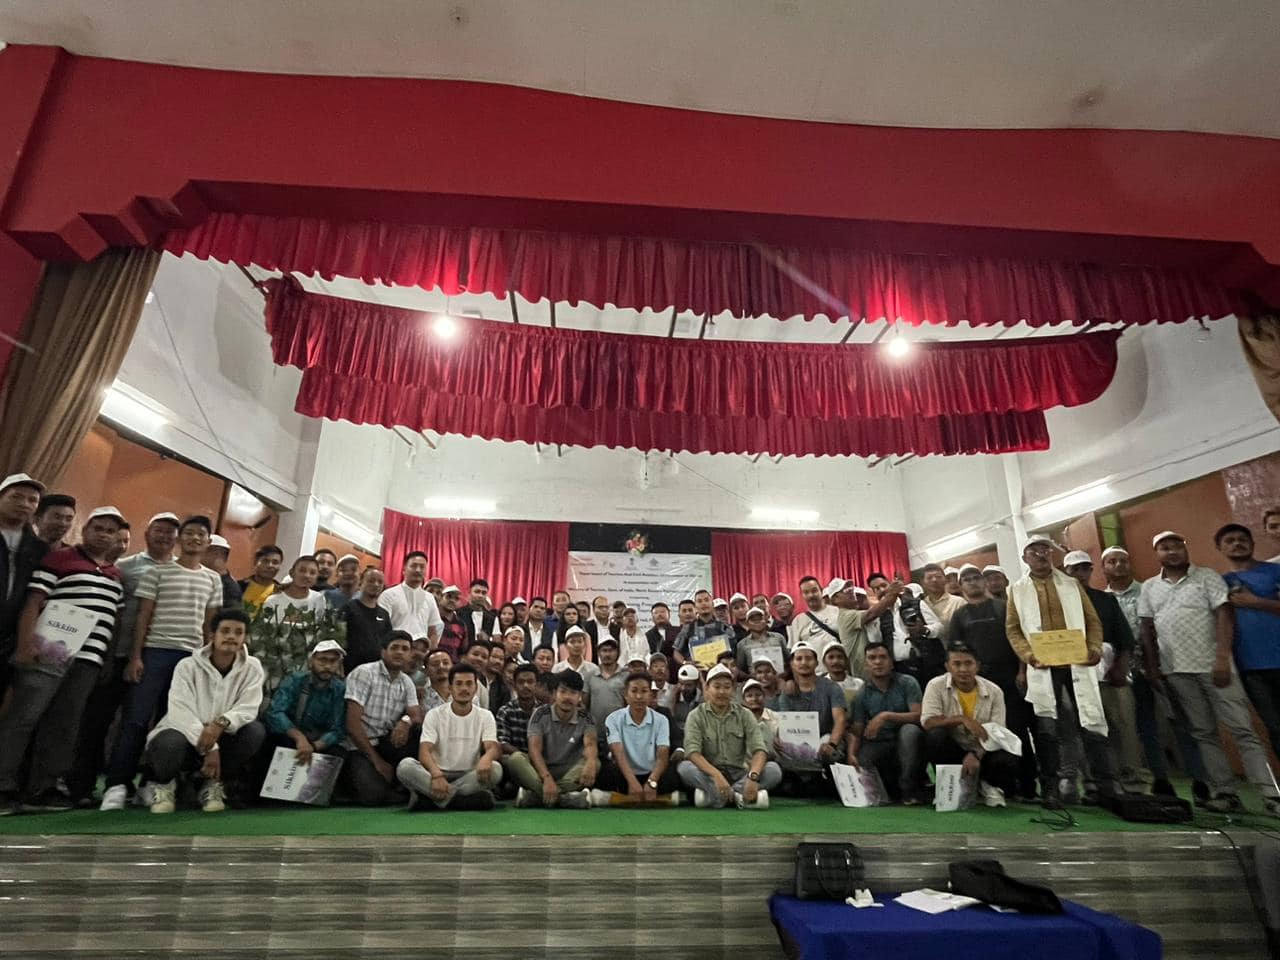 Day-Long Workshop On Etiquette and Grooming for Tourist Taxi Drivers Held In Pakyong